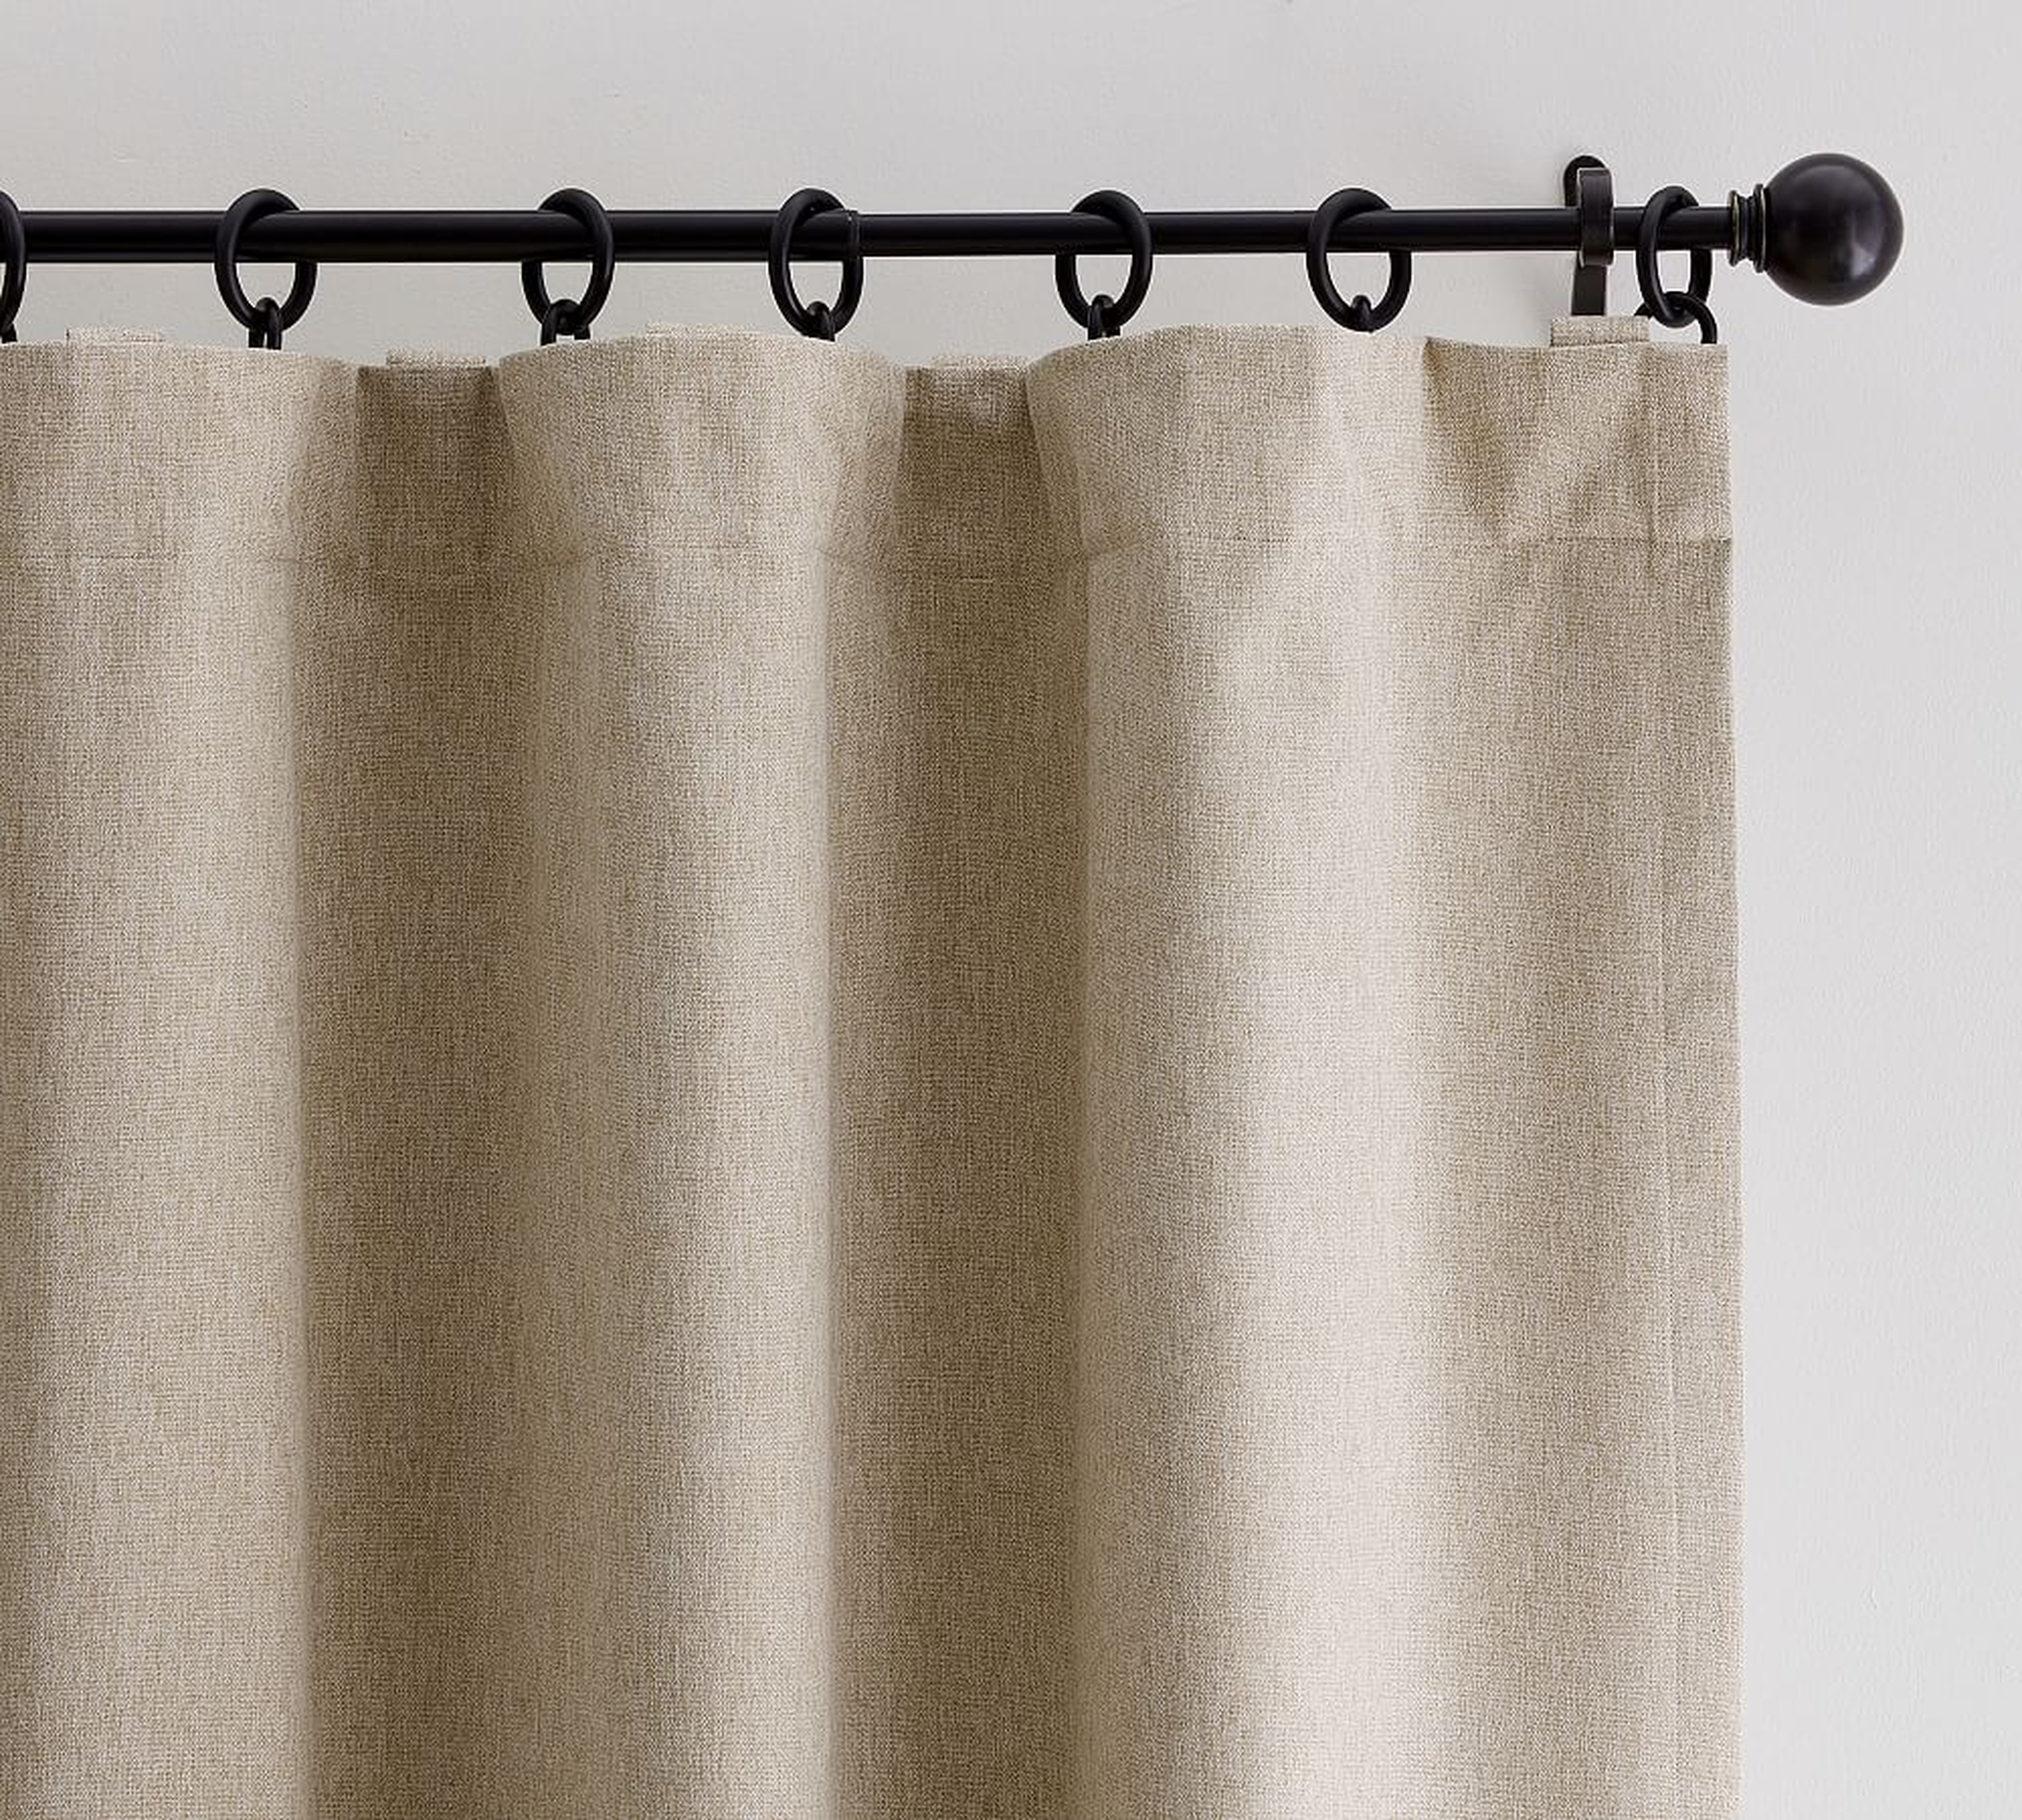 Peace & Quiet Noise-Reducing Blackout Curtain, 50 x 96", Dark Flax - Pottery Barn